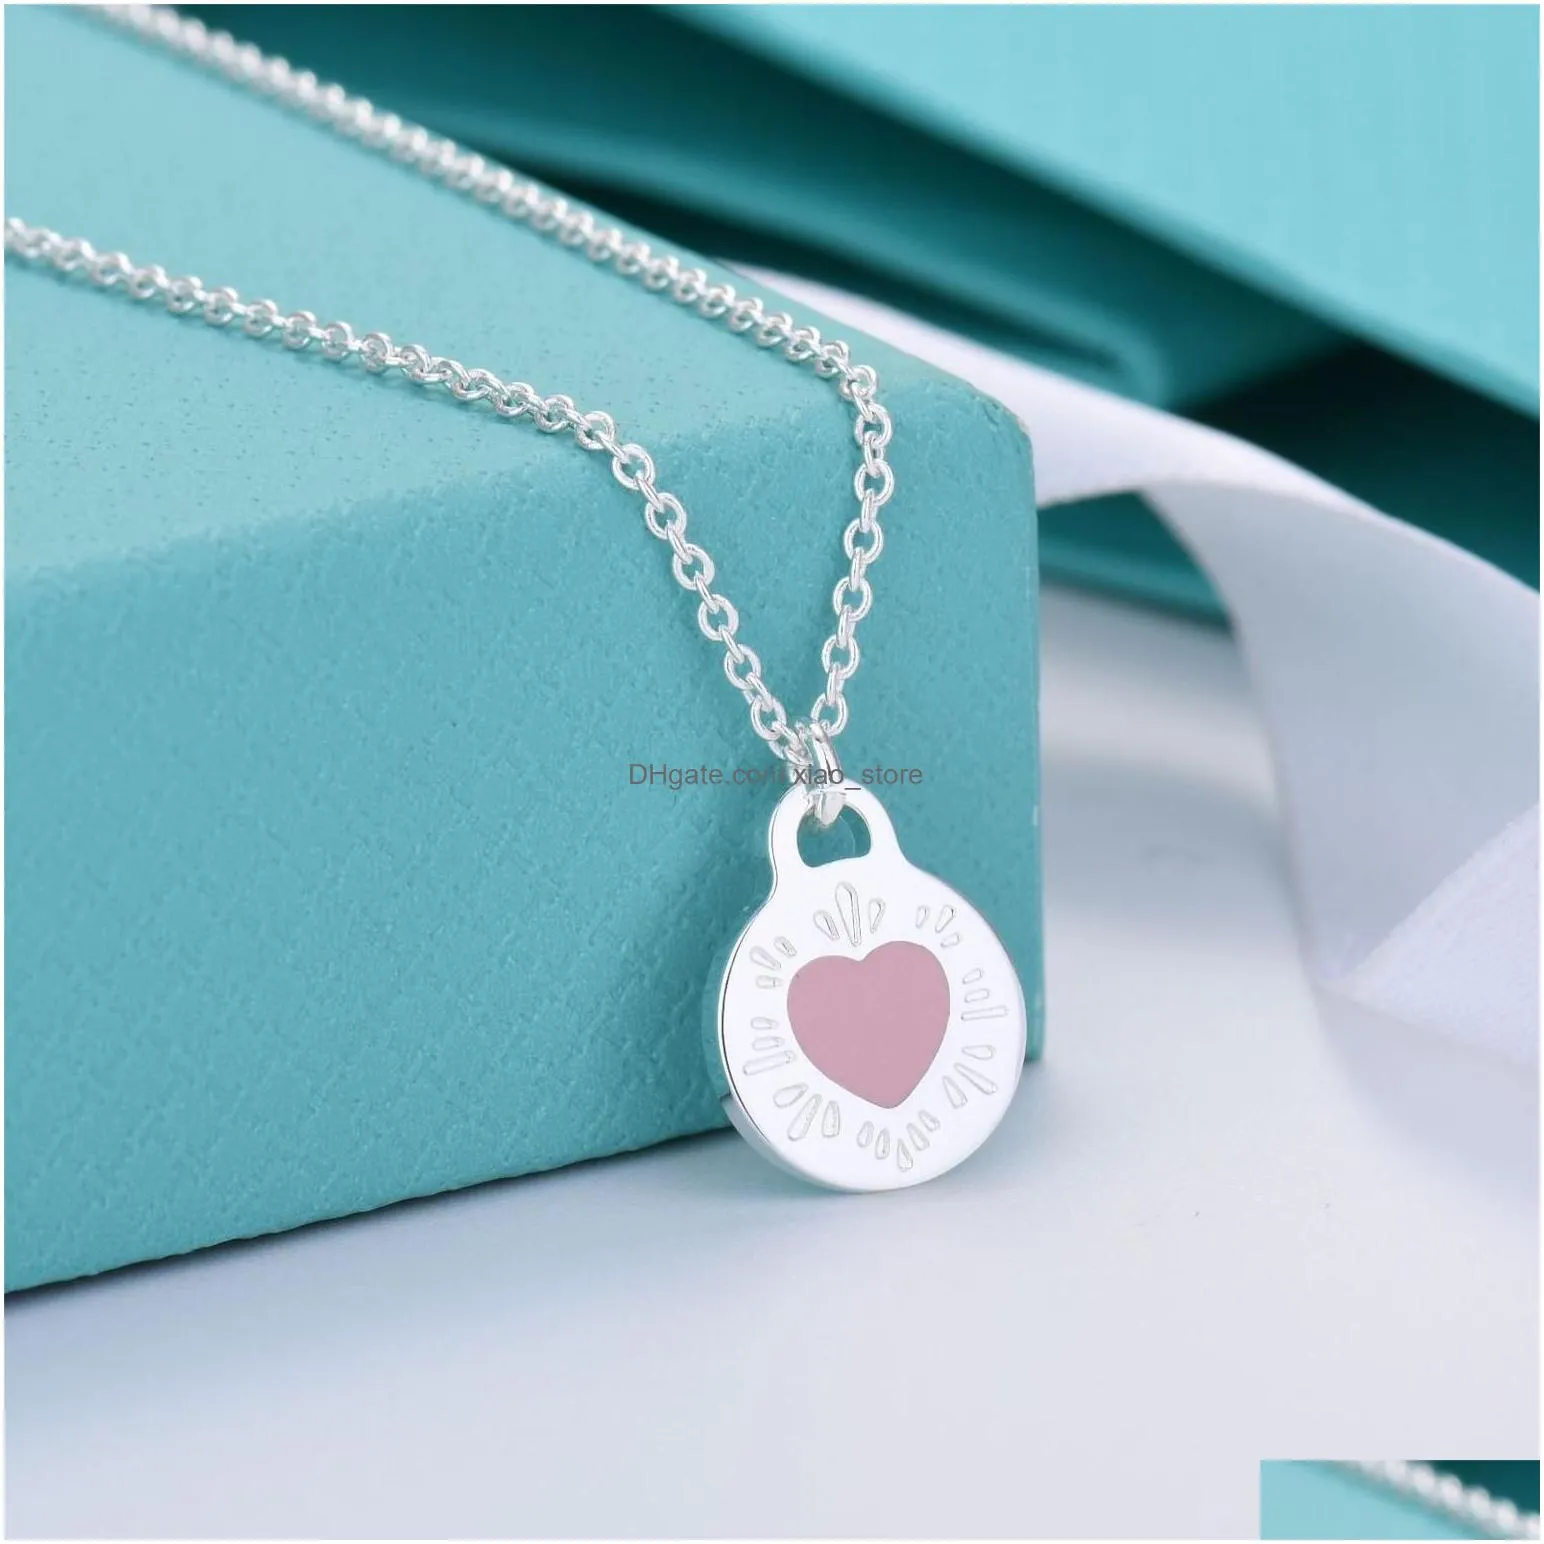 s925 silver sweet love heart designer pendant necklace for women cross chain cute pink blue red cute choker luxury brand elegant necklaces jewelry valentines